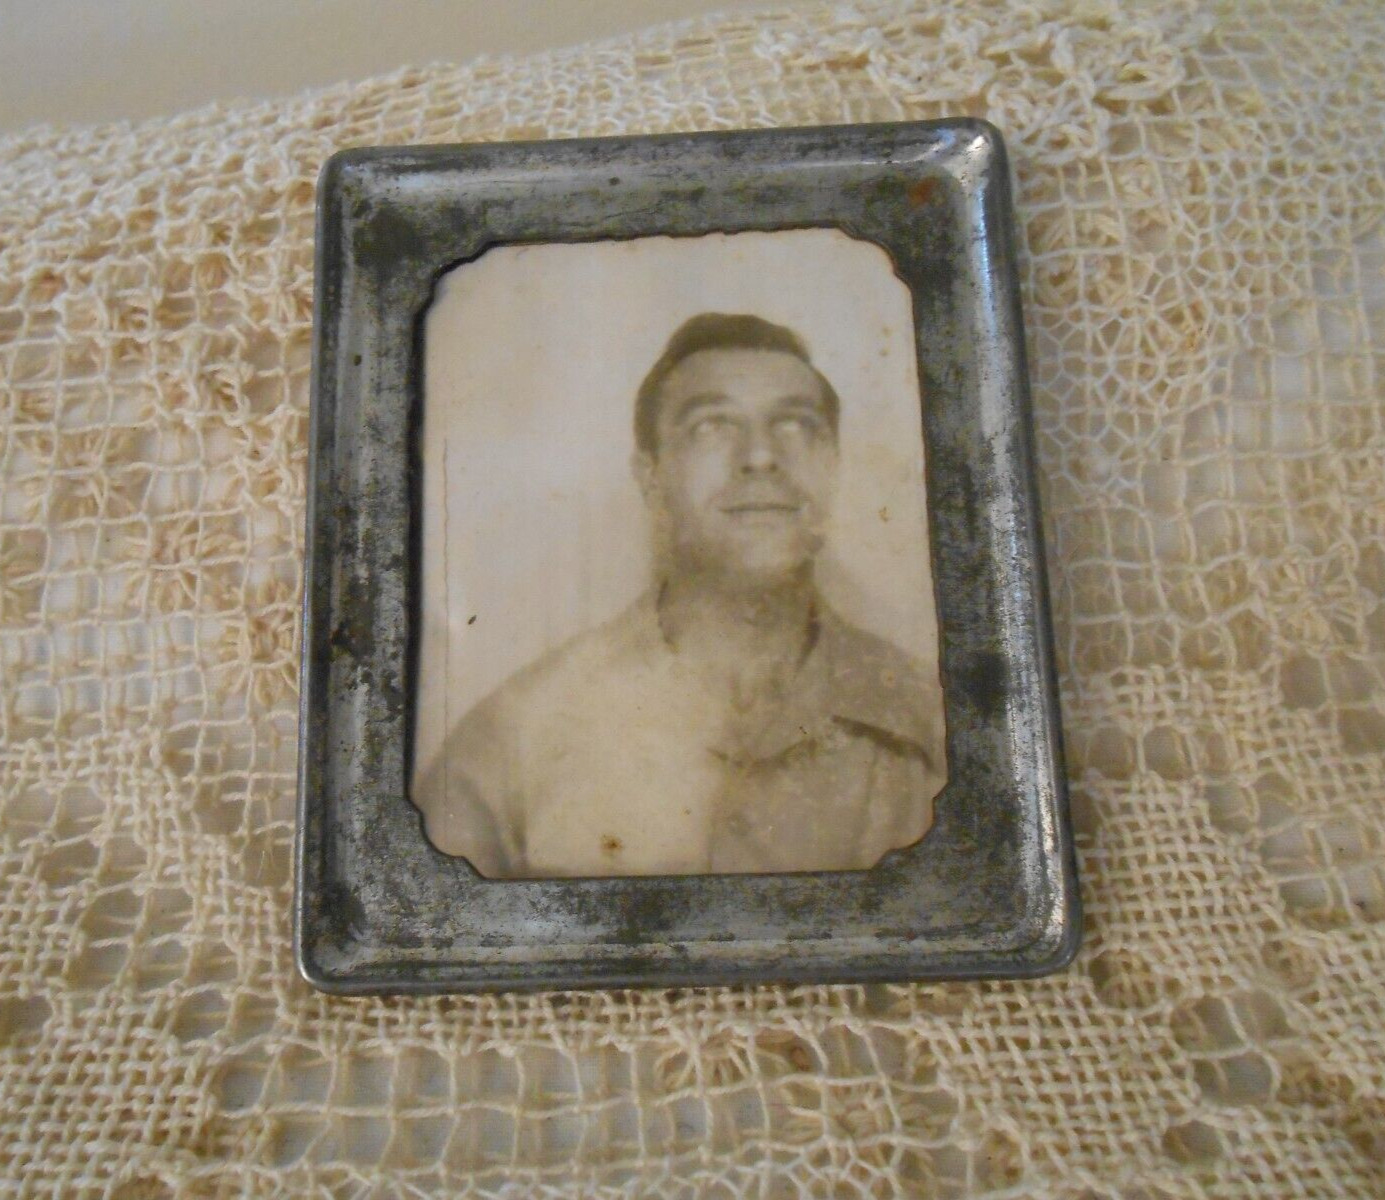 Vintage Work Photo/Picture ID Square Chrome/Metal Frame